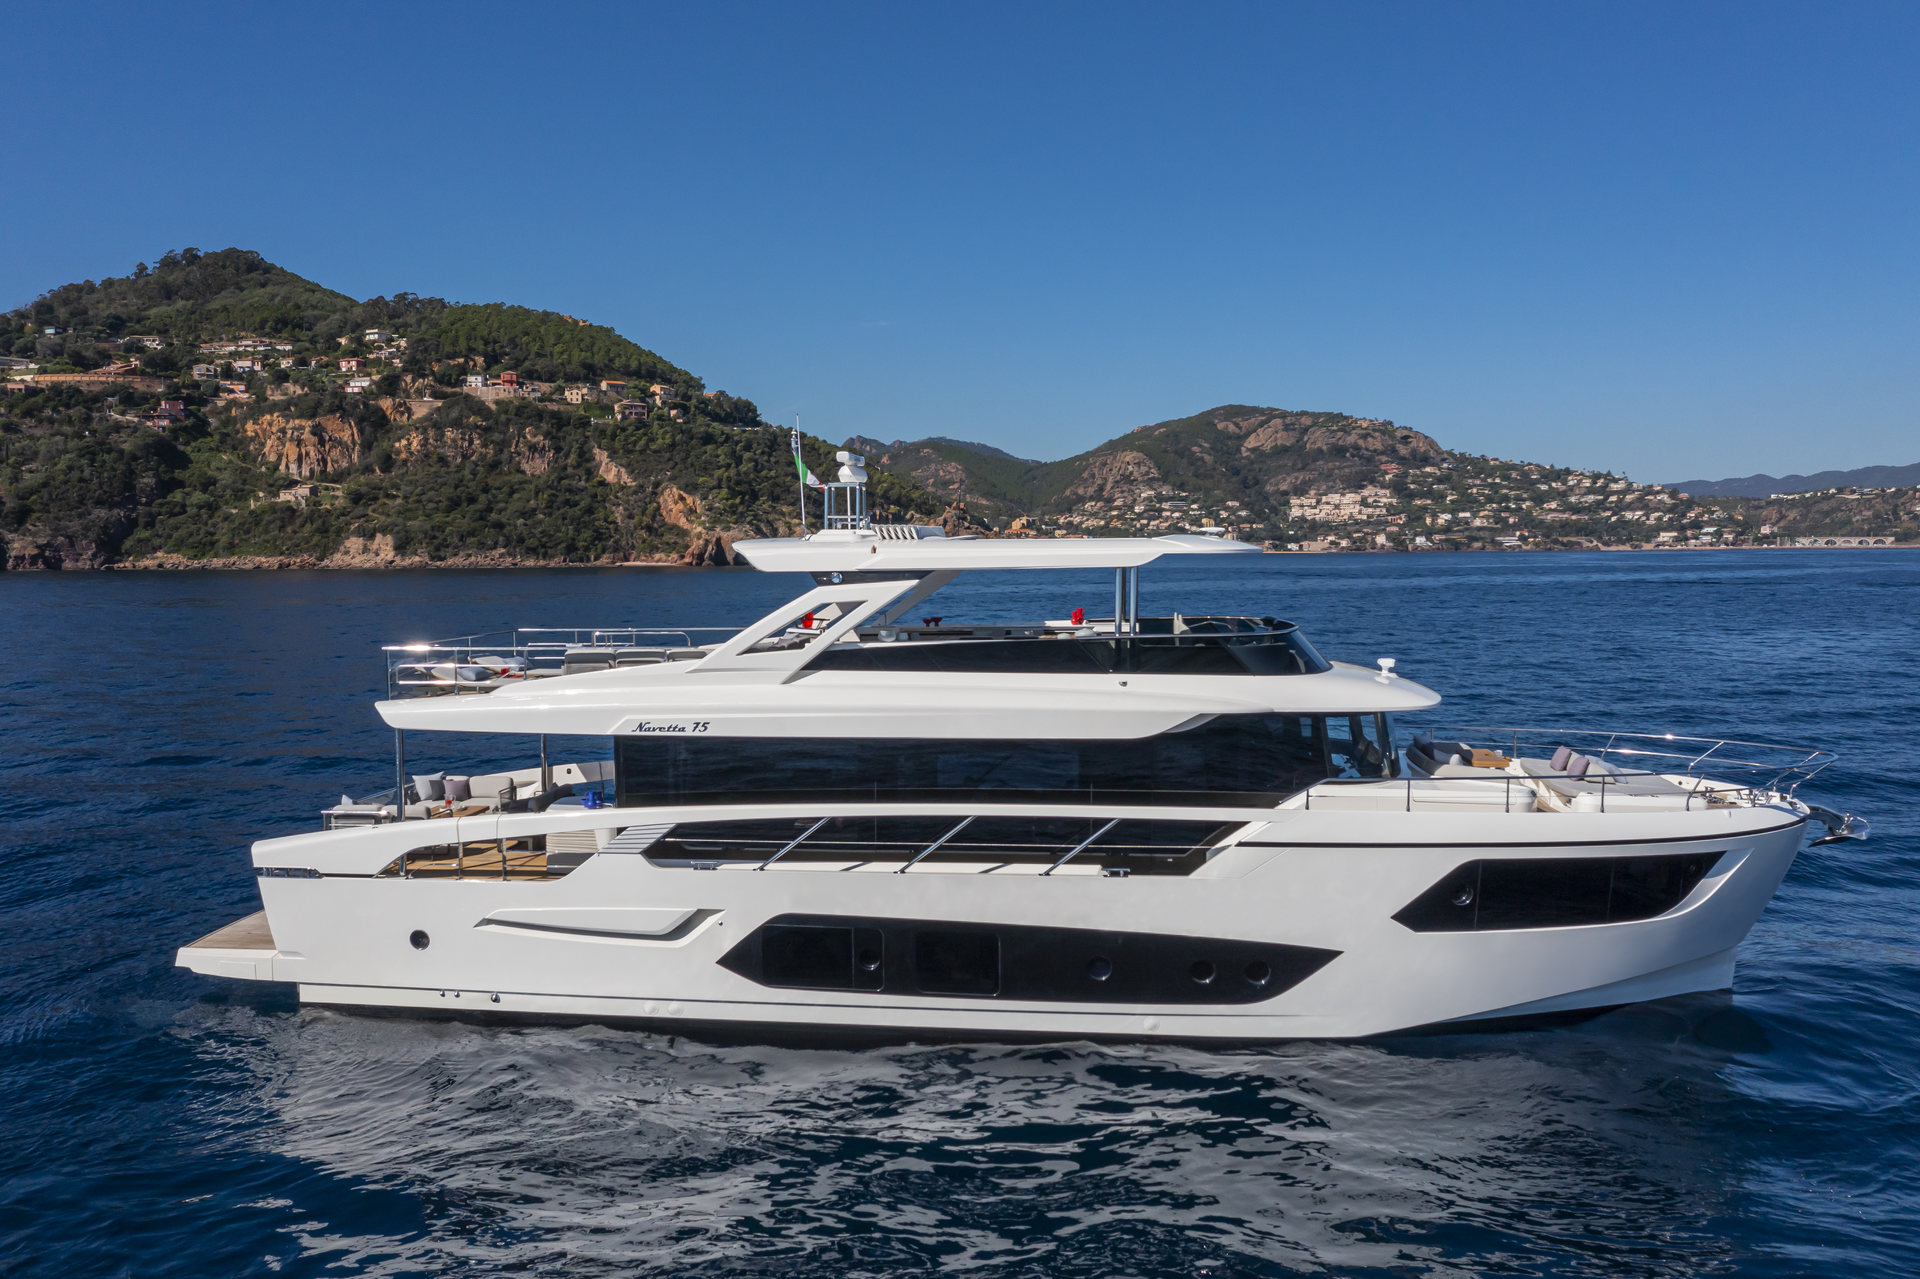 360 VR Virtual Tours of the Absolute Navetta 75